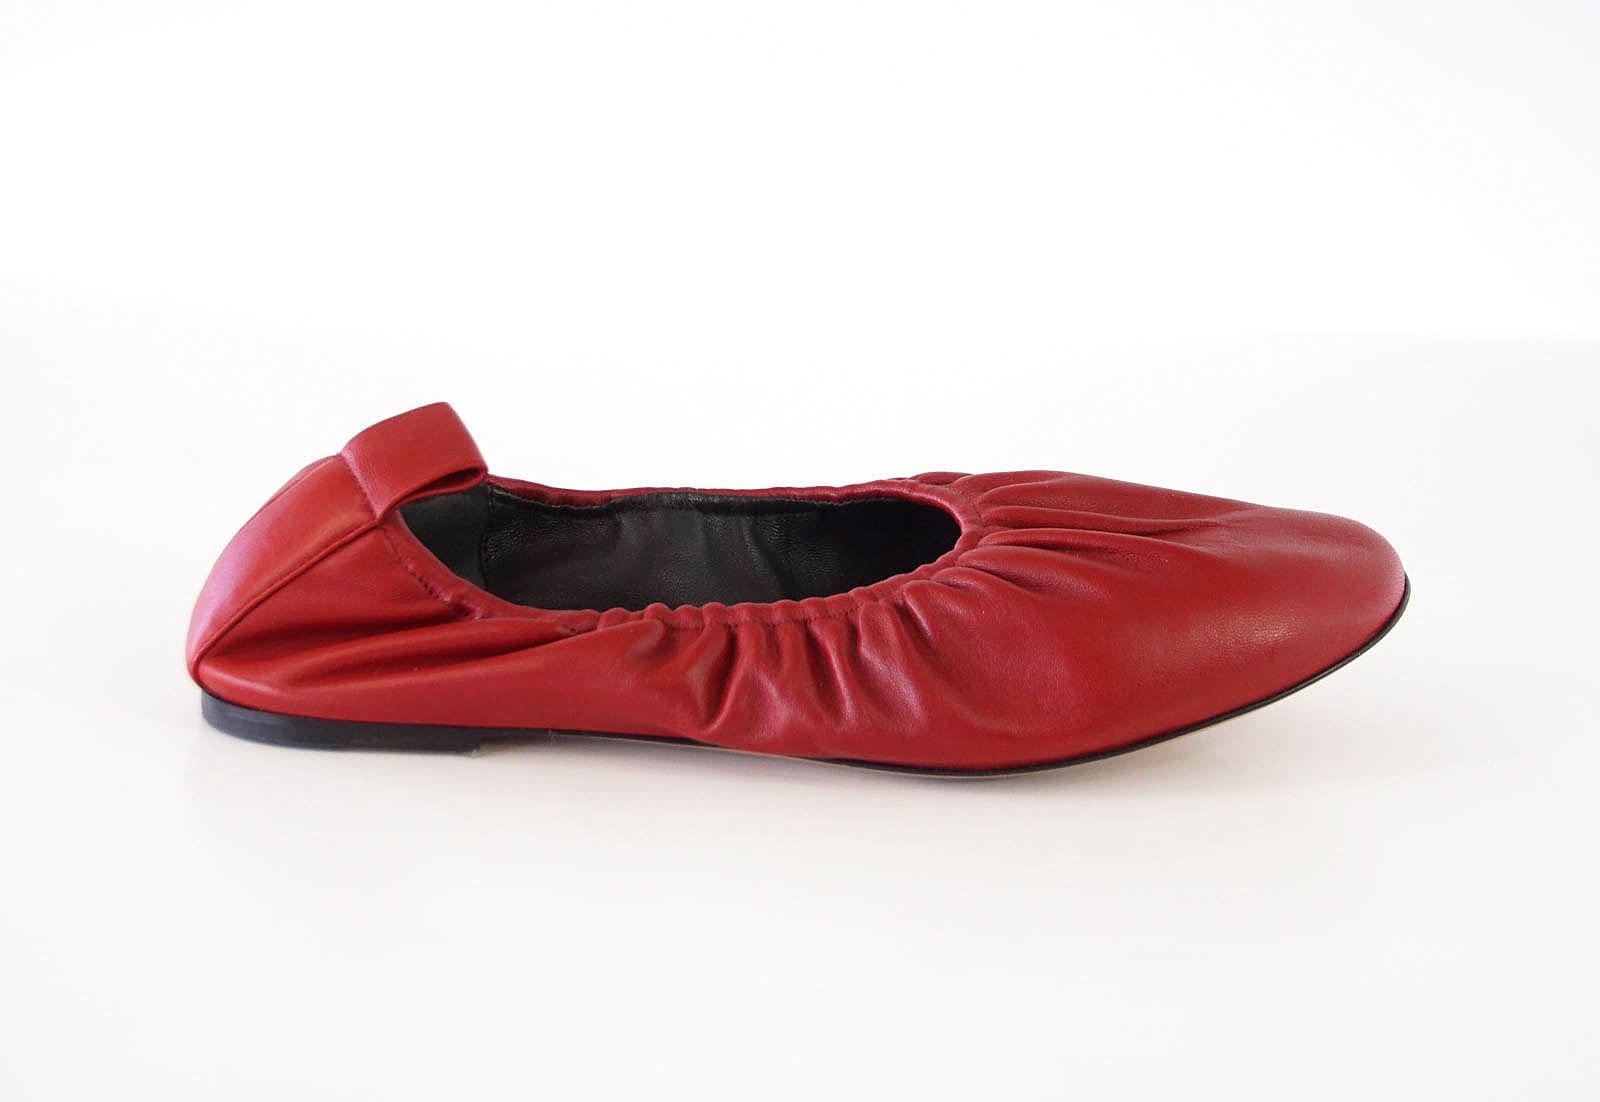 Celine Shoe Buttery Red Leather Ballet Flat Chic Styling 39 / 9 - mightychic